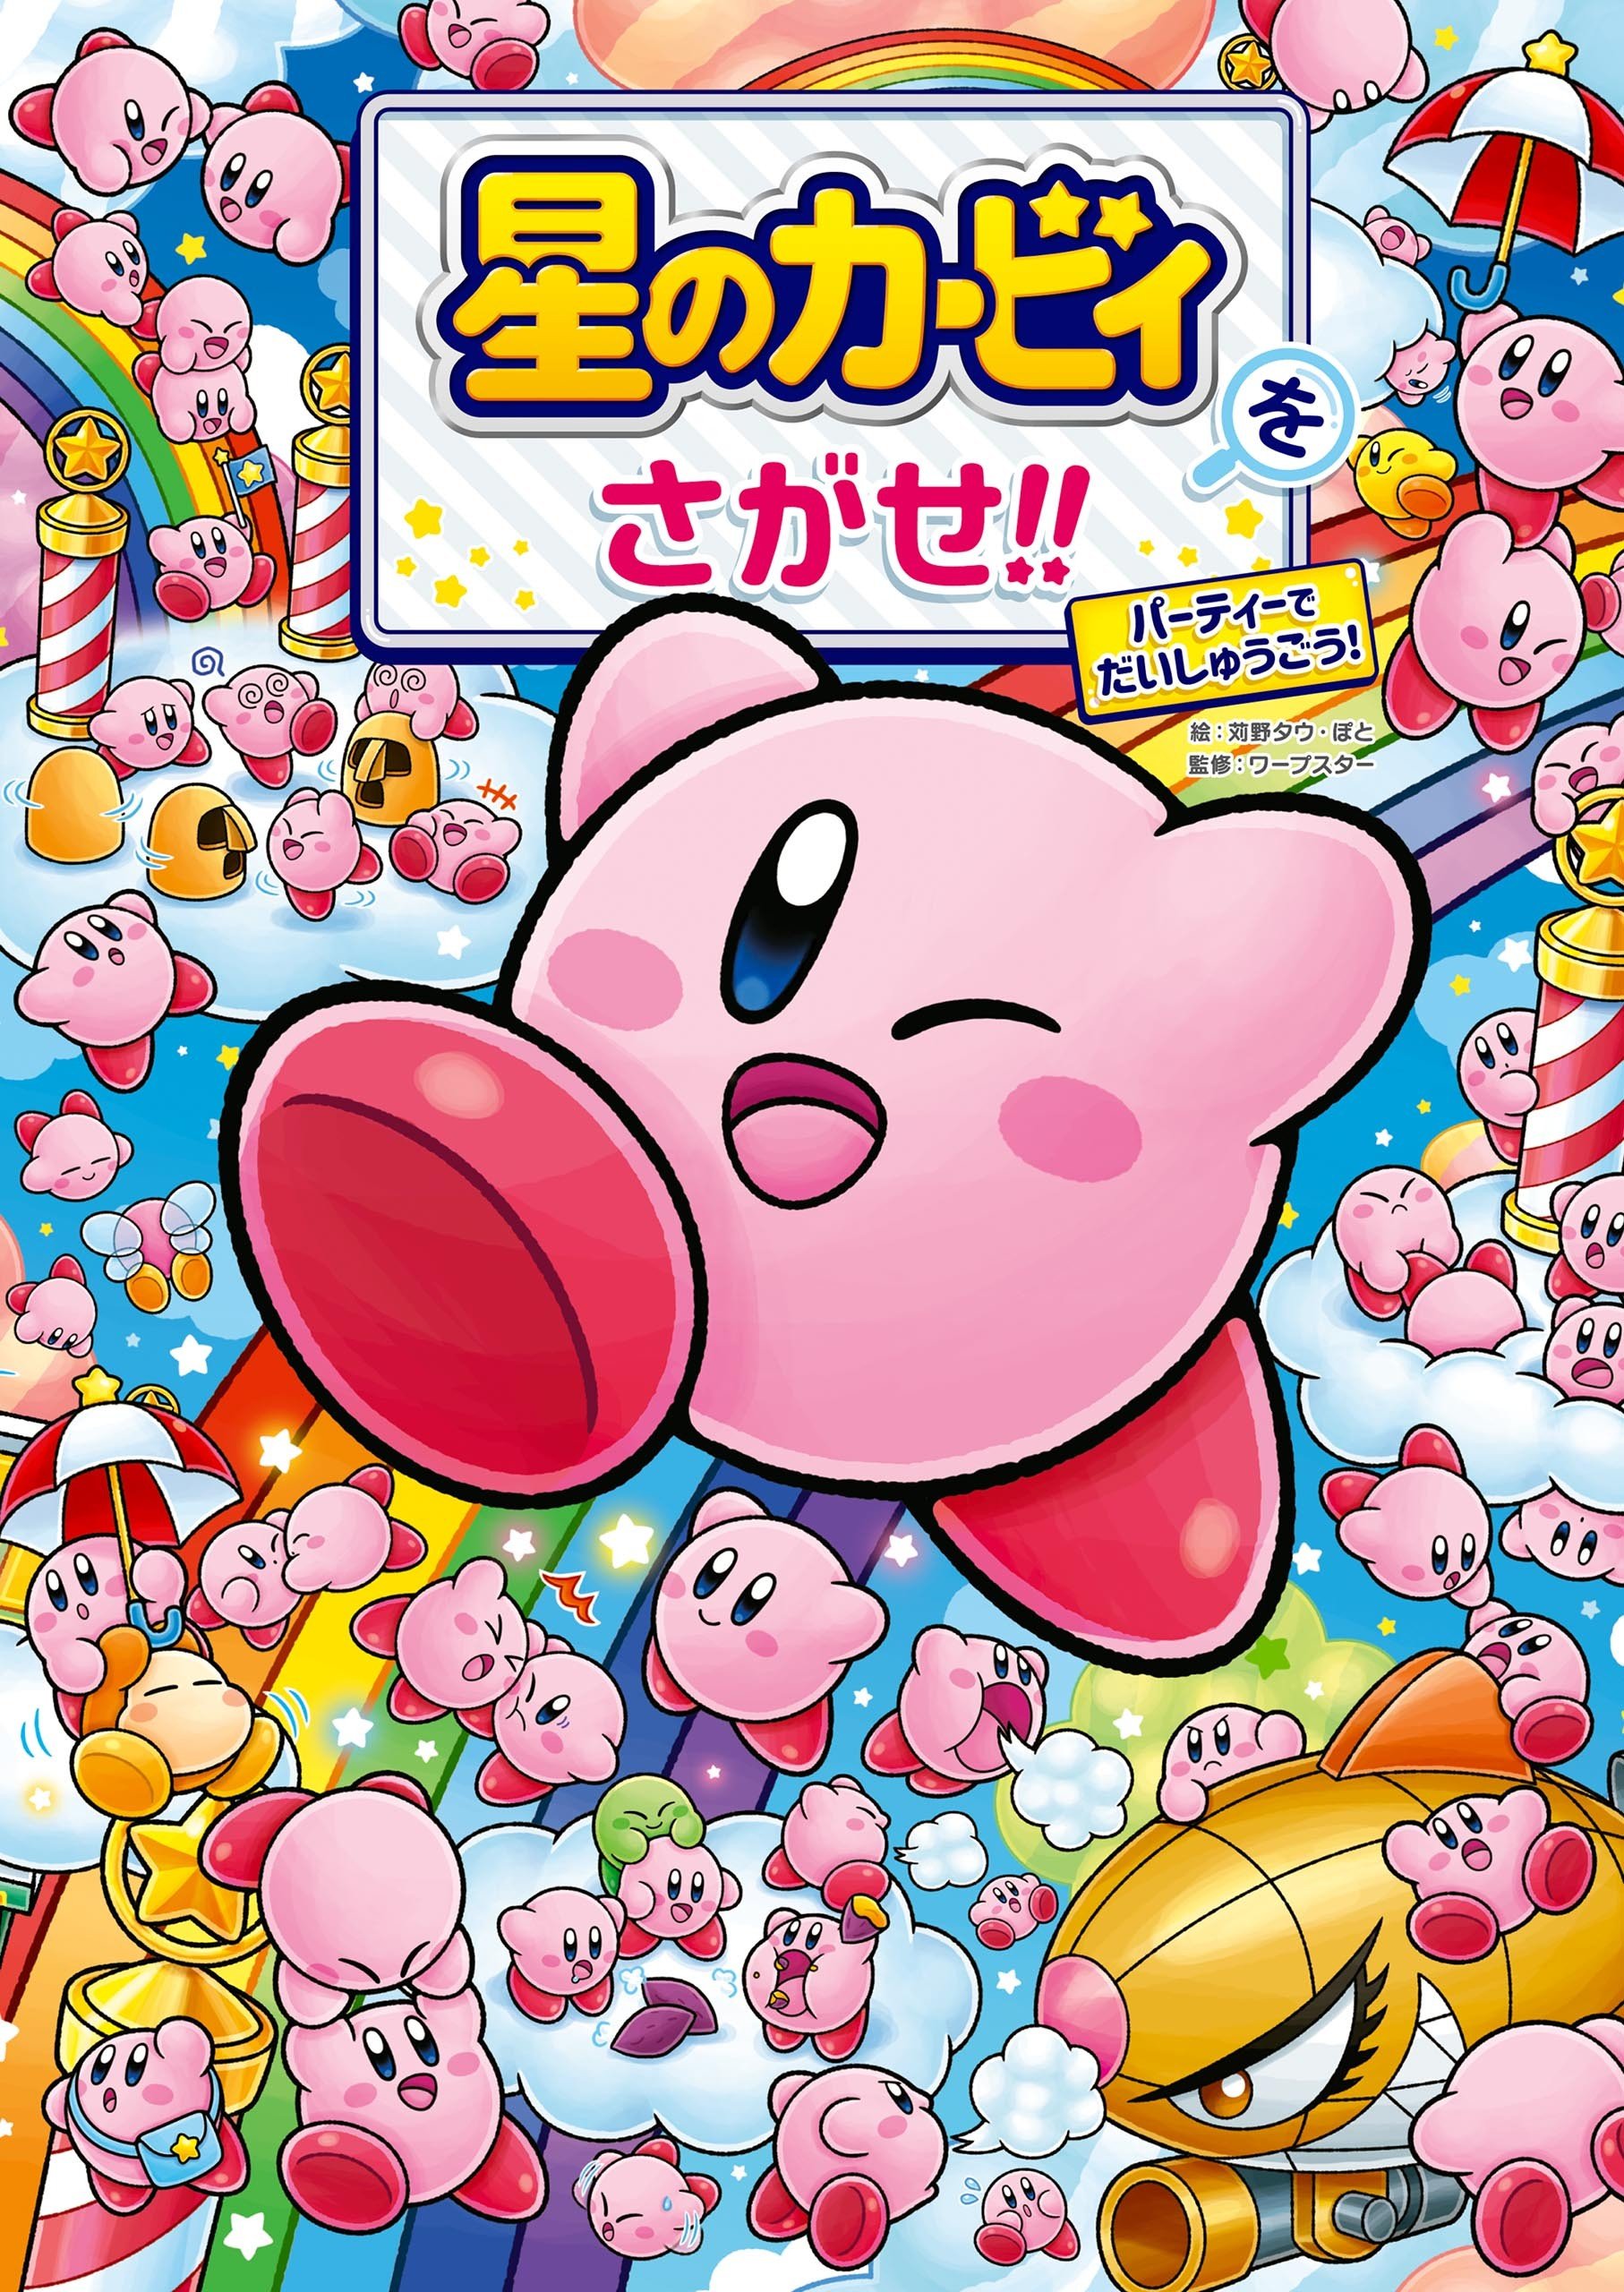 Find Kirby of the Stars! Lots of Kirby